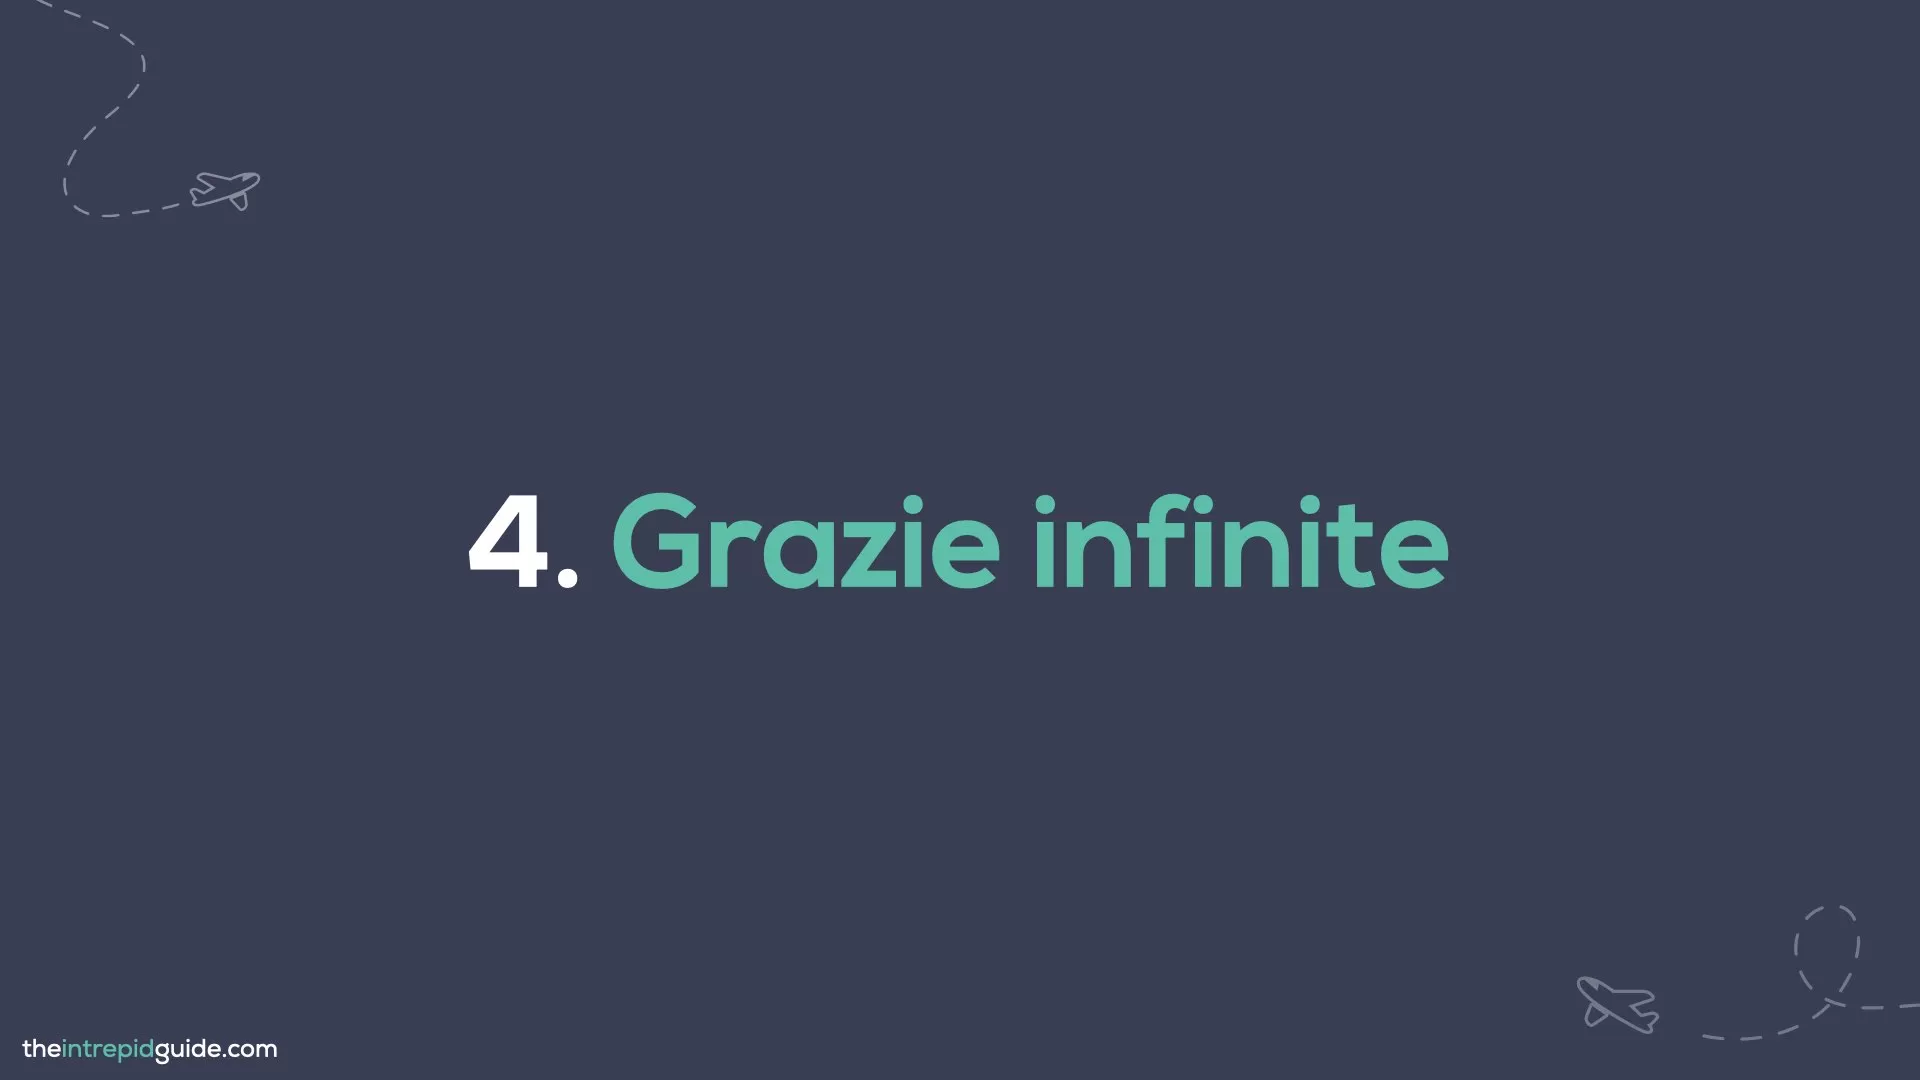 How to say thank you in Italian - Grazie infinite